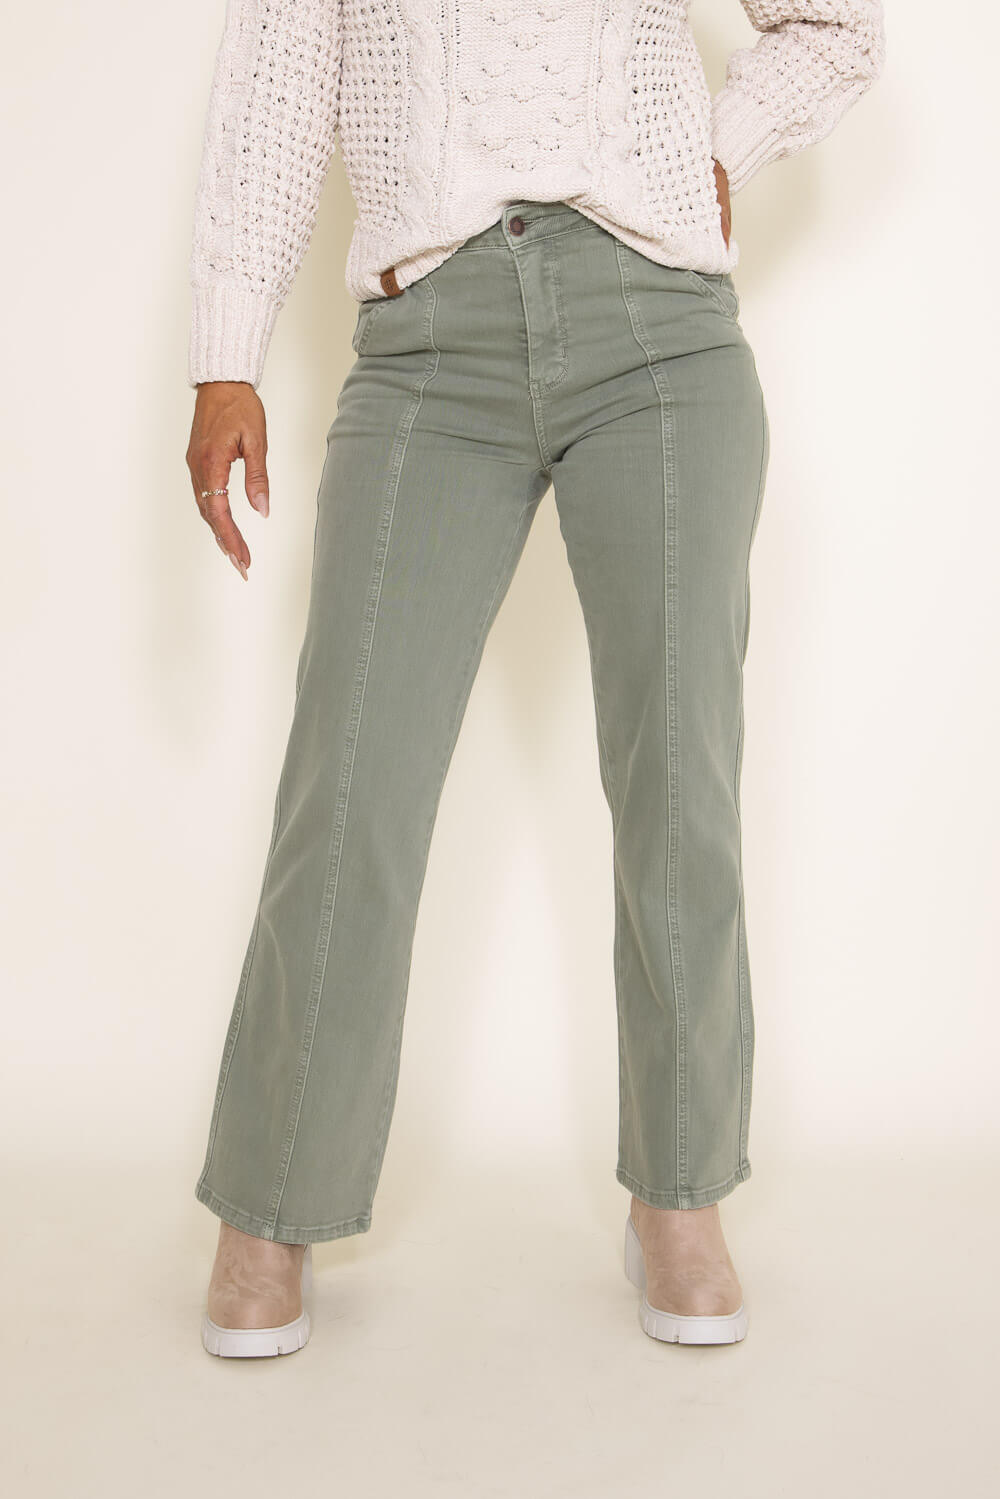 Judy Blue High Rise Dyed Front Seam Straight Jeans for Women in Sage